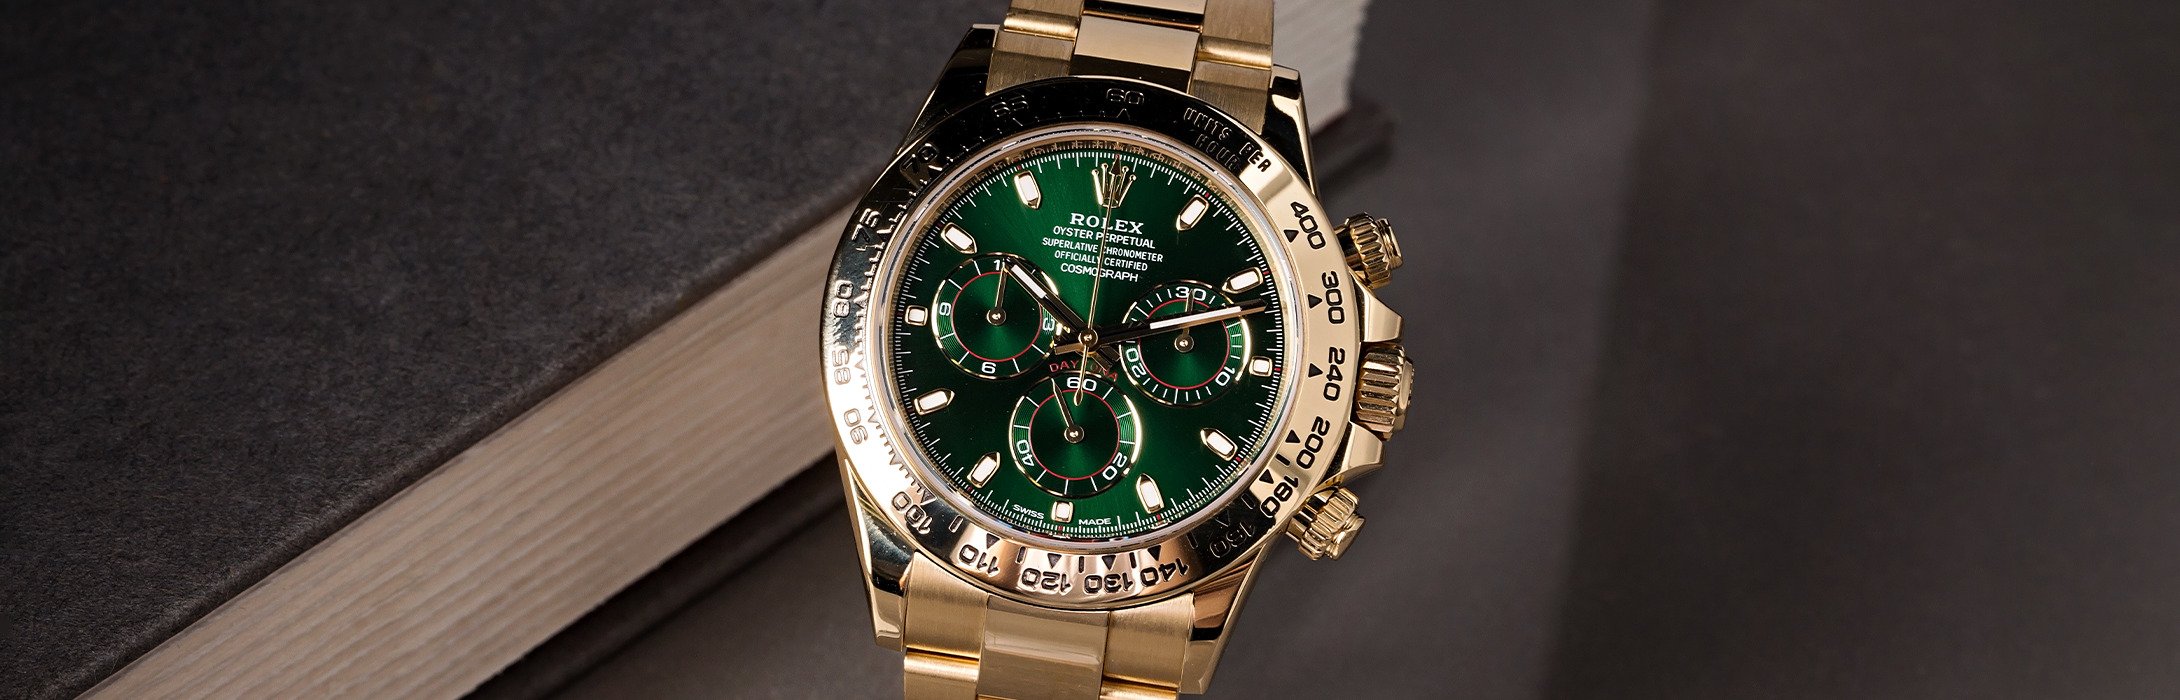 Rolex Ultimate Buying Guide | Watches